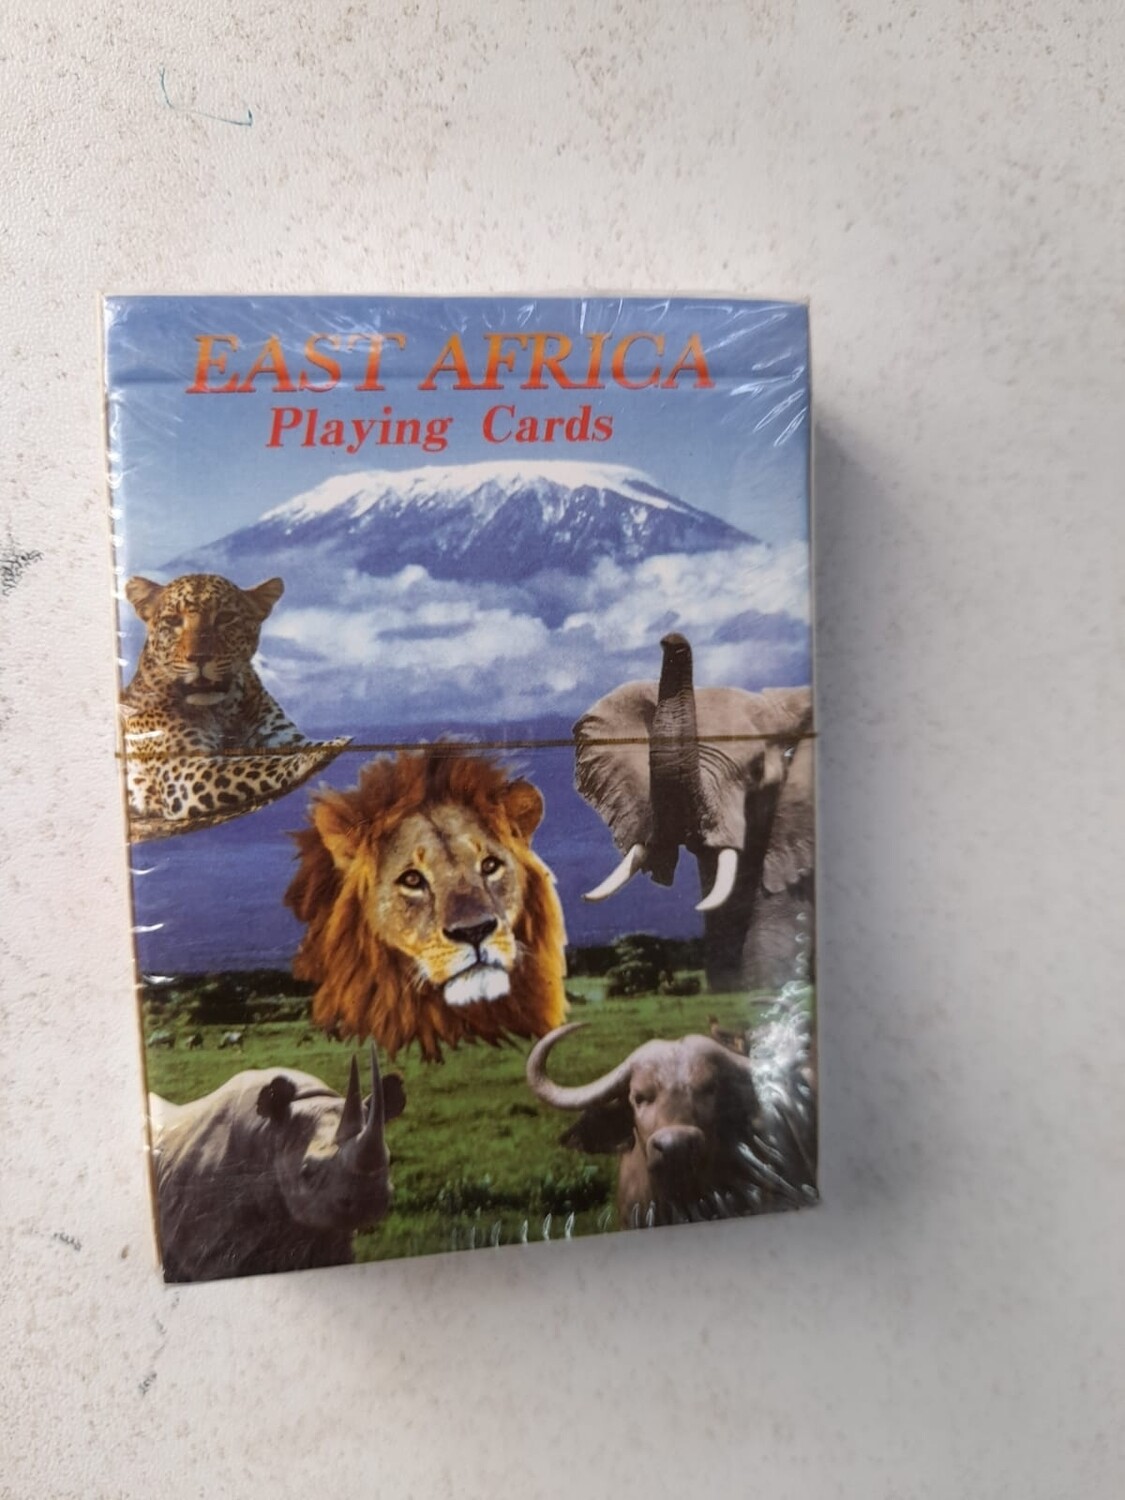 East Africa playing cards E A -PLAYCARD